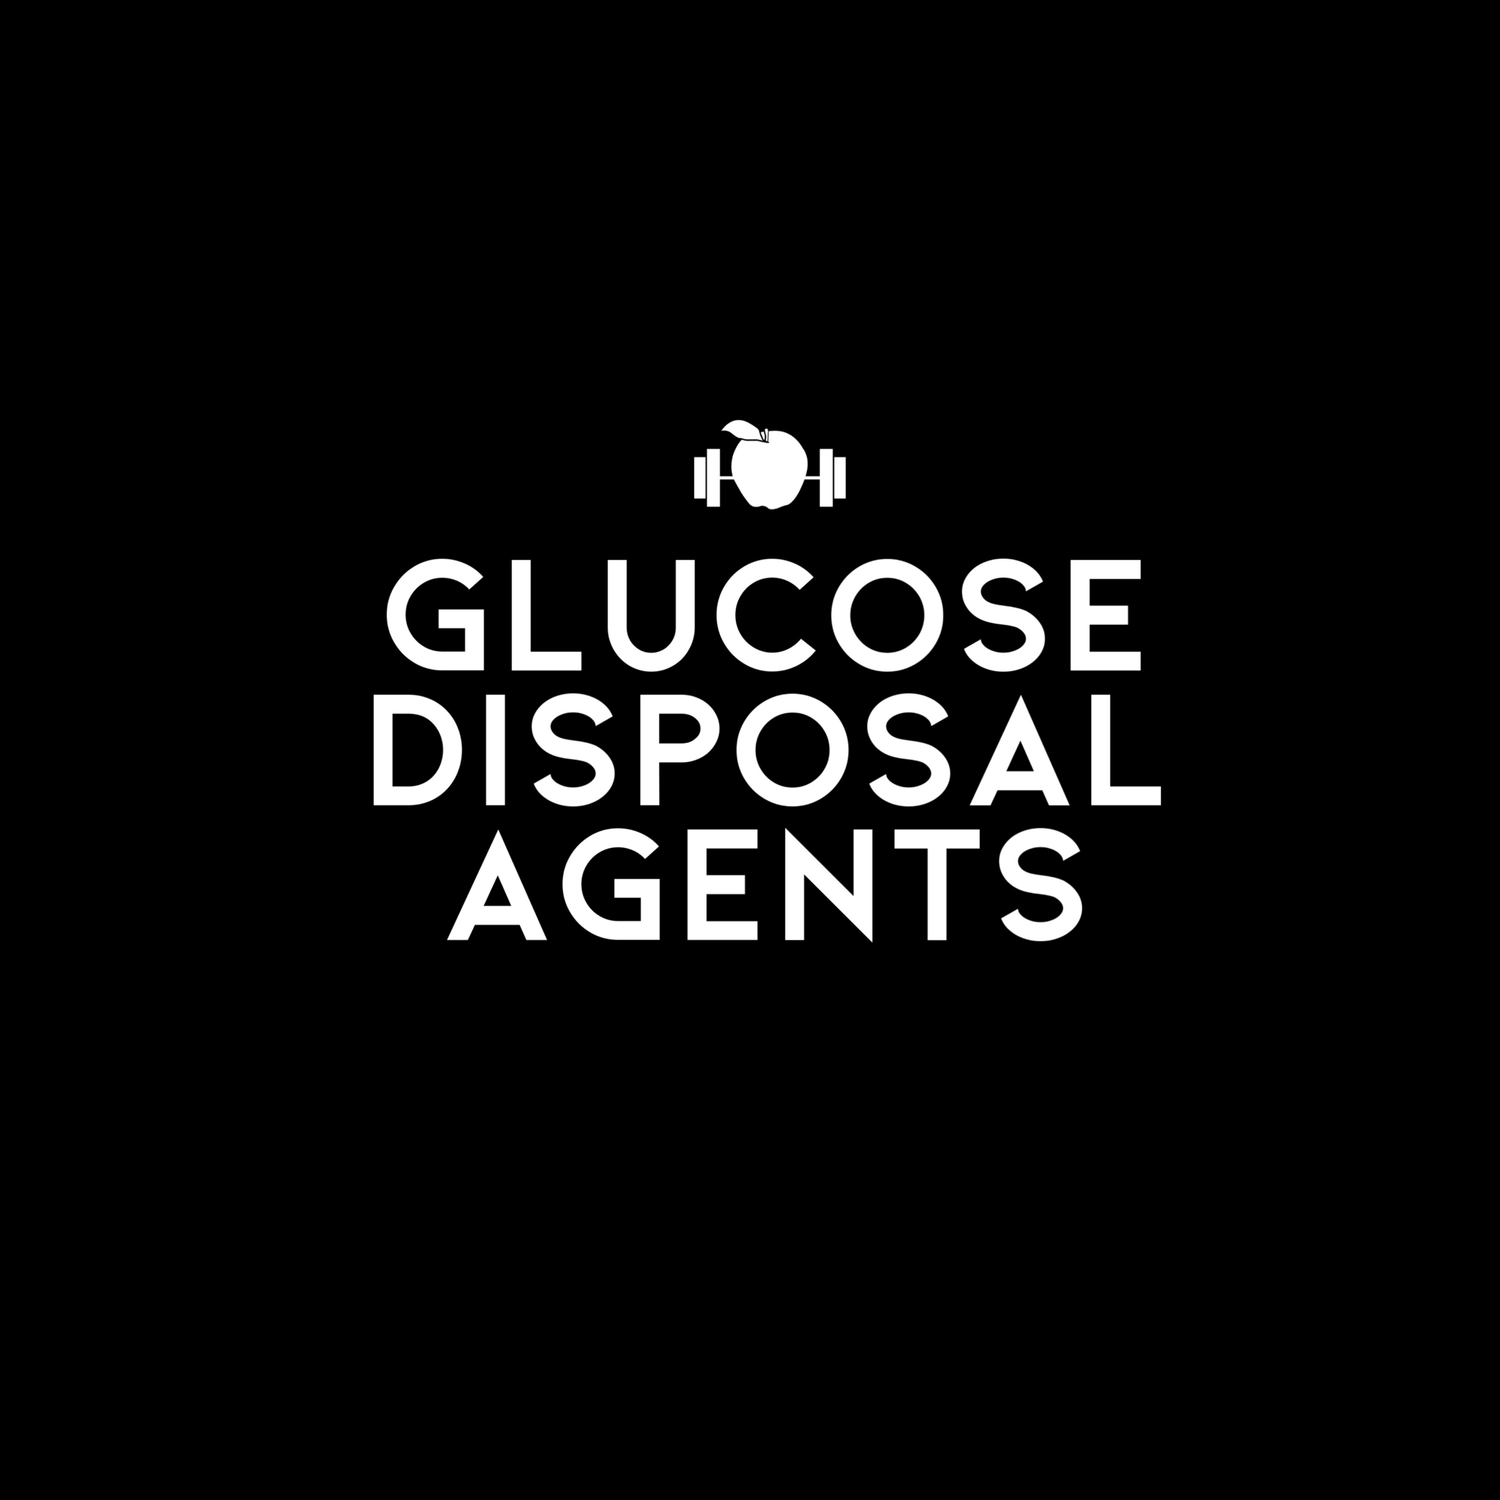 Glucose Disposal Agents